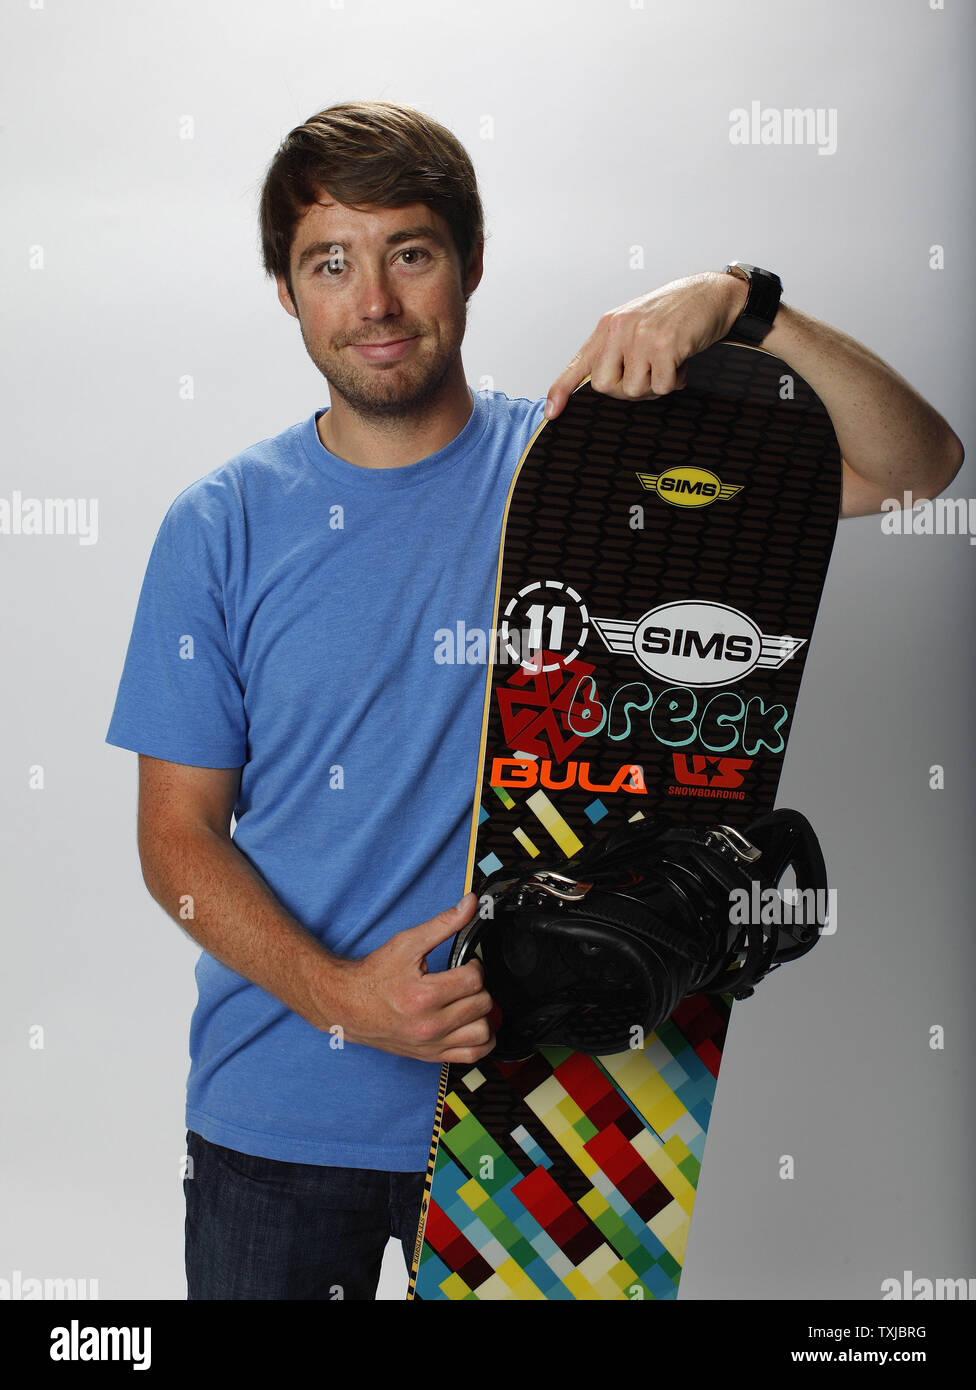 Halfpipe snowboarder Steve Fisher poses for a portrait at the 2010 United  States Olympic Team Media Summit in Chicago on September 11, 2009.  UPI/Brian Kersey Stock Photo - Alamy